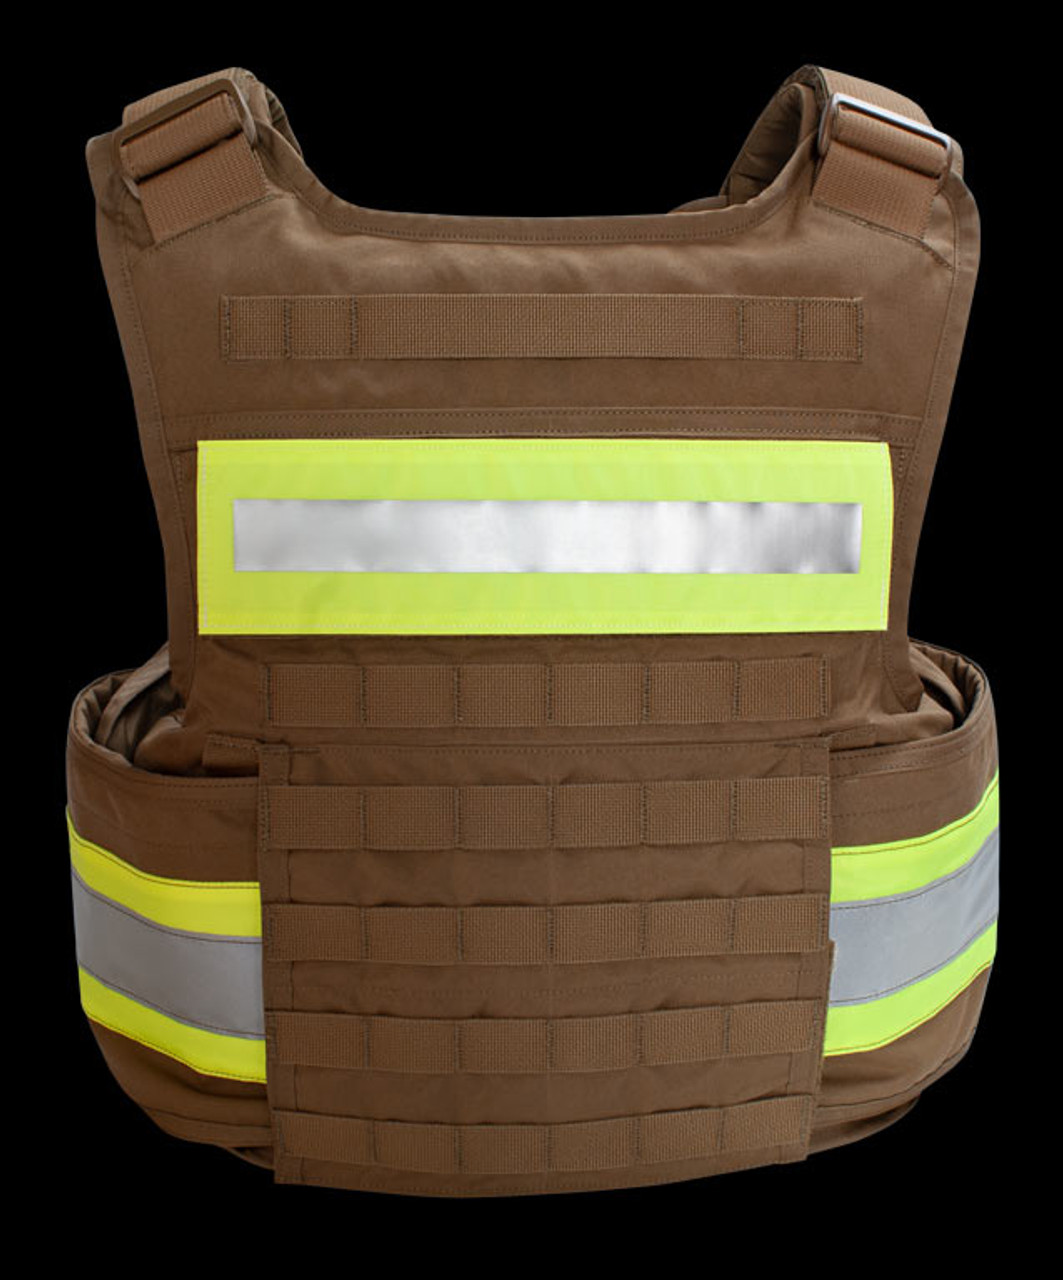 Point Blank FRK 1080 Plate Carrier Ballistic Body Armor Vest, For Military and Police, Available with NIJ .06 Level III and IV Hard Armor Plates